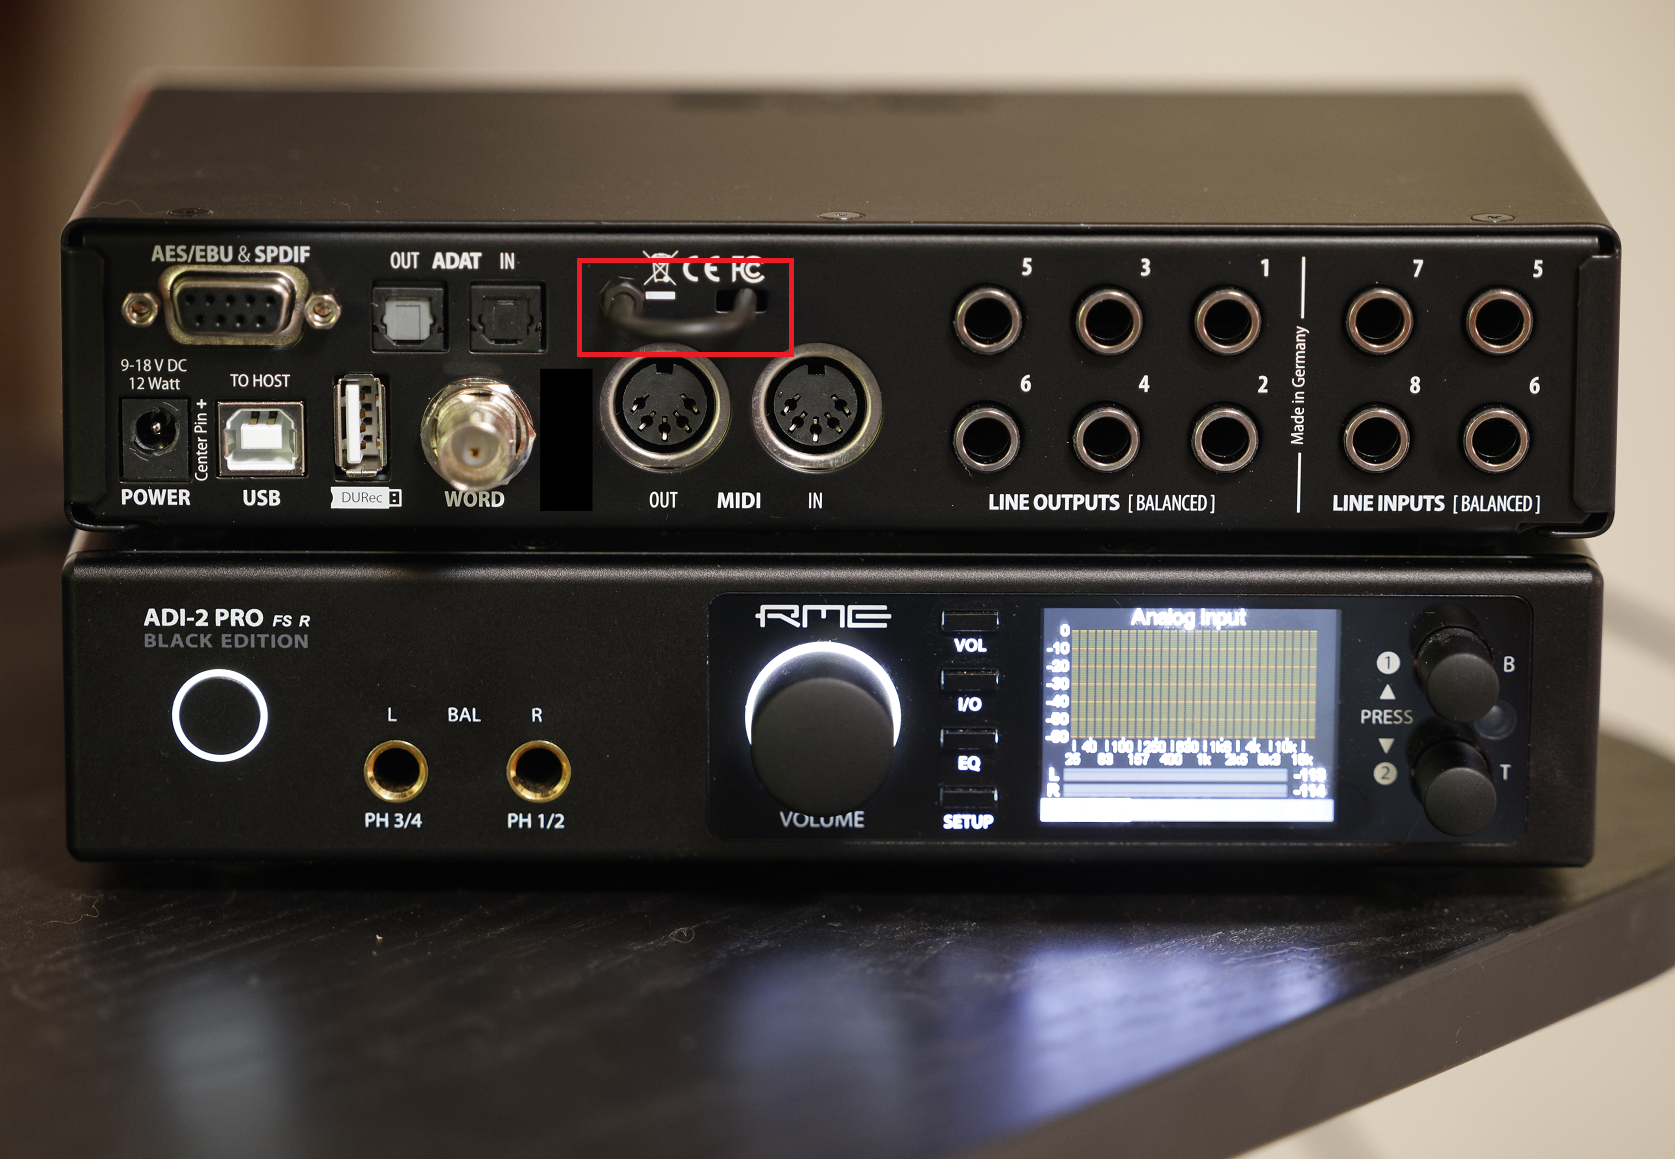 Unofficial) RME UCX II Interface Review and Measurements | Audio 